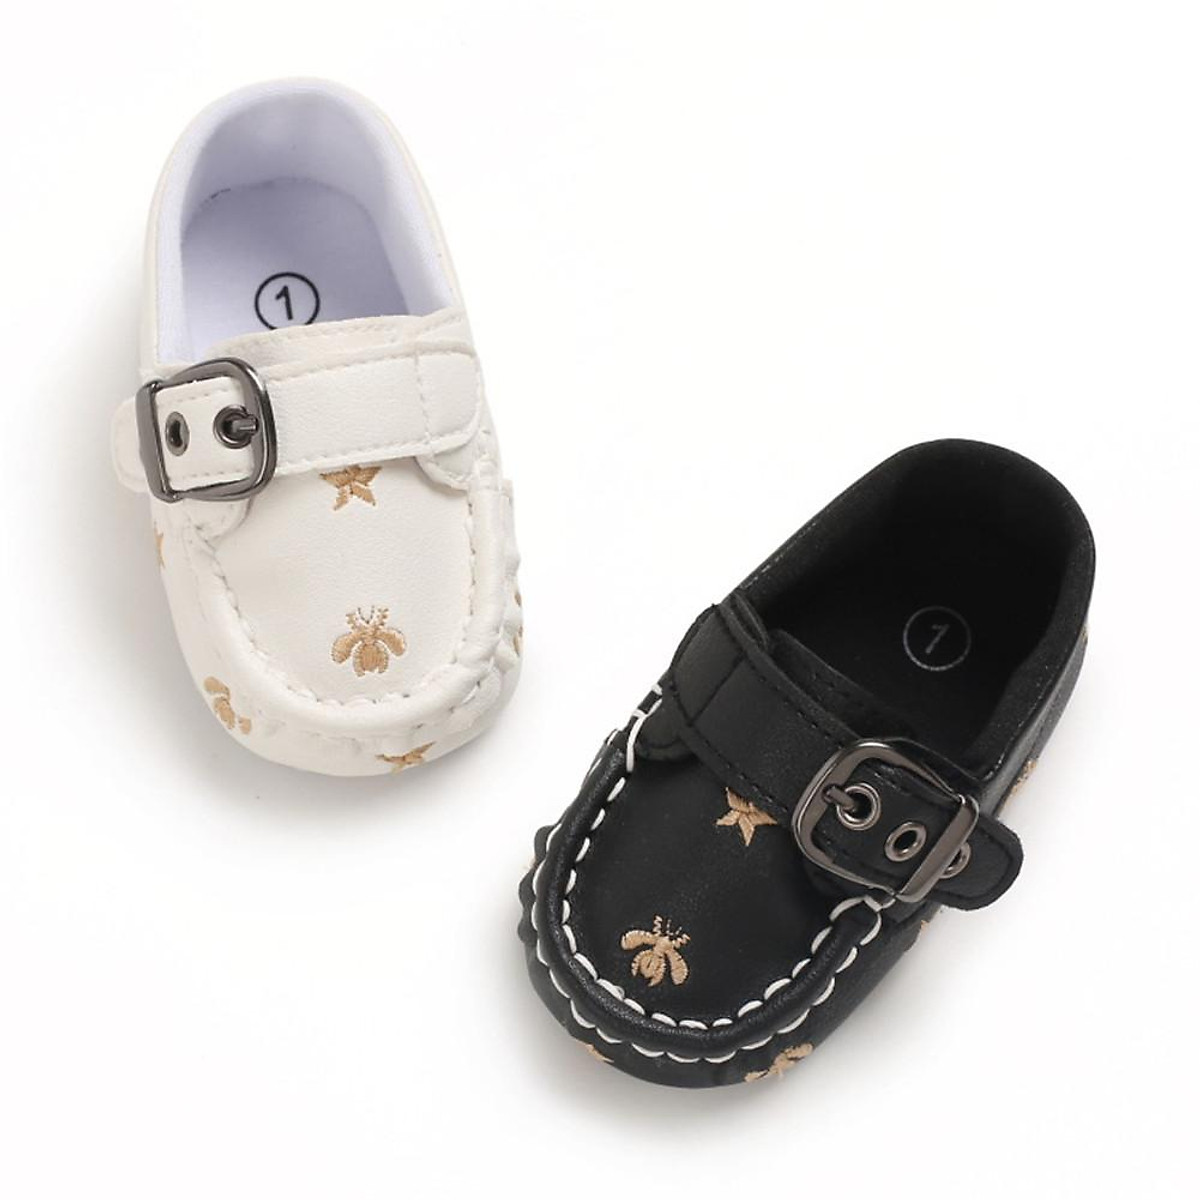 Yfashion Baby oddler Shoes British Style Small Leather Shoes for 3-12  Months Baby color